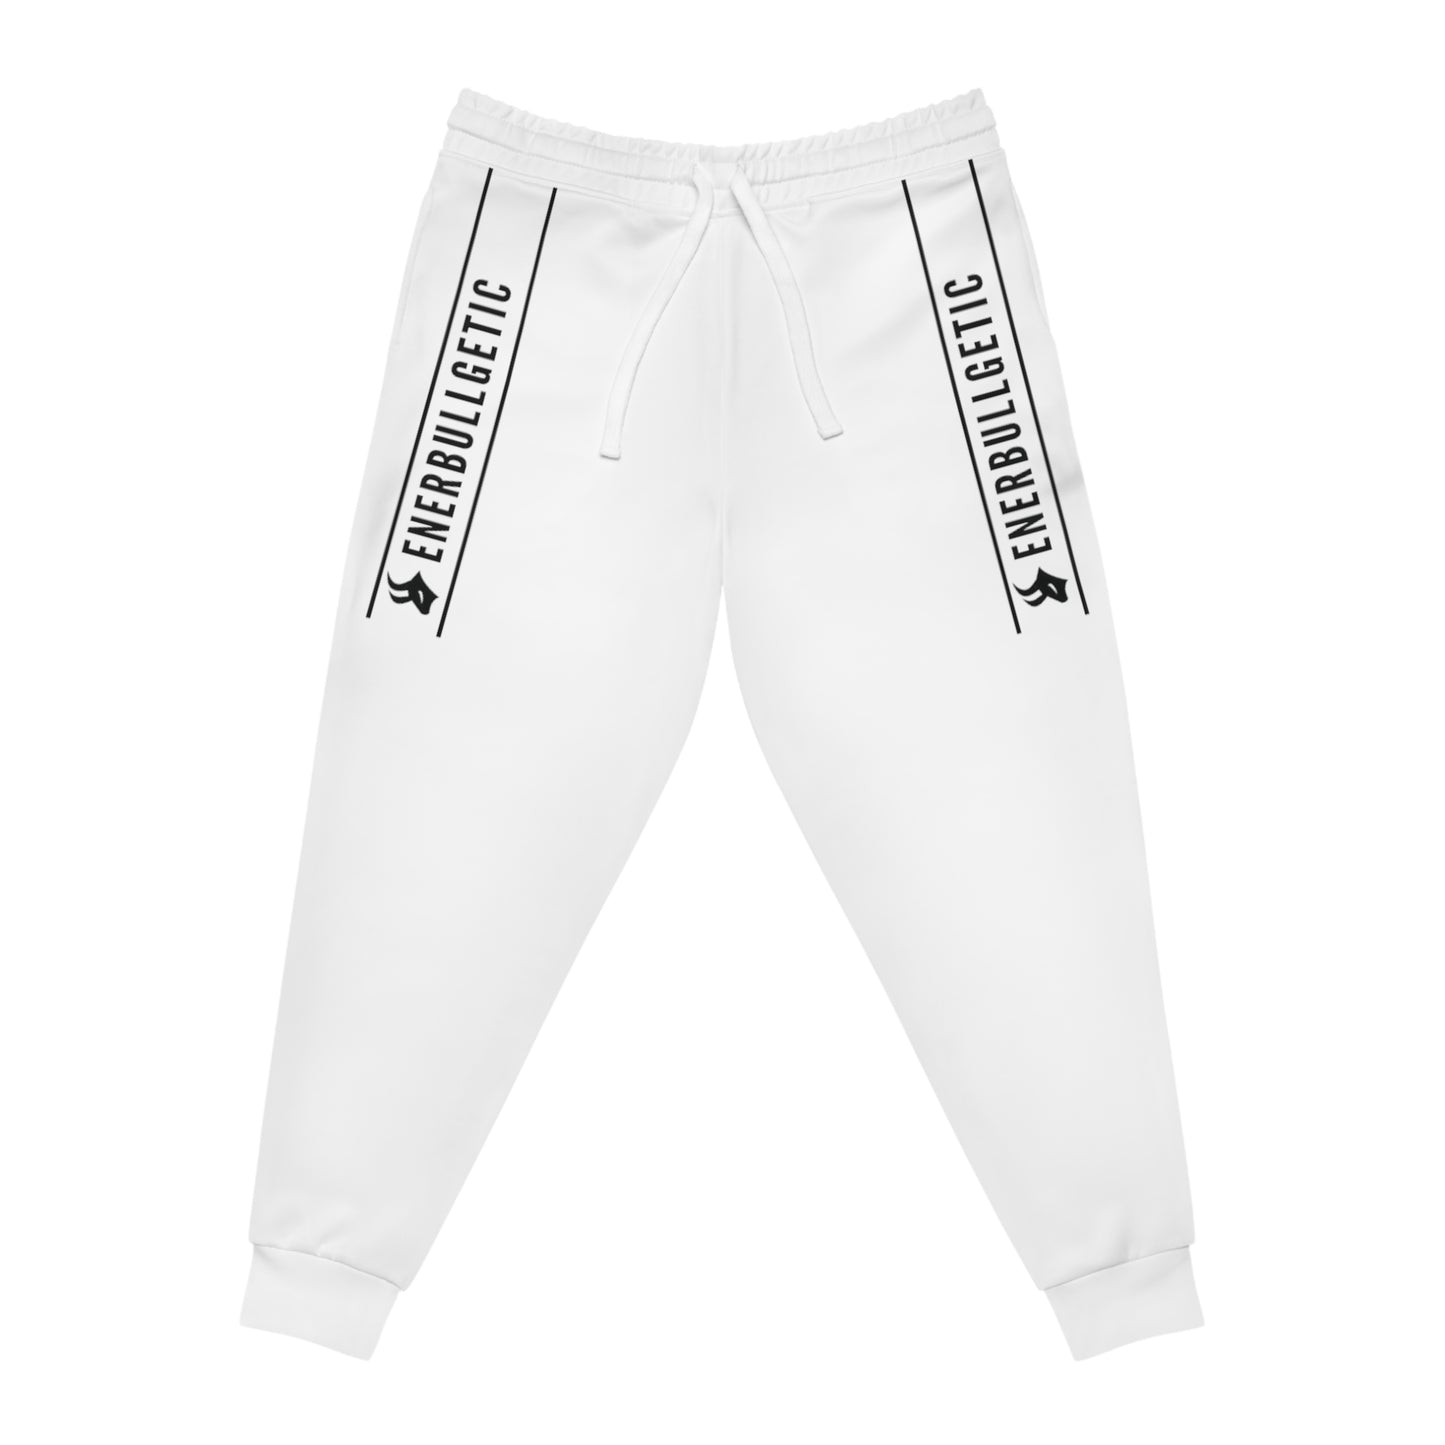 EnerBullgetic Striped White Edition Athletic Joggers